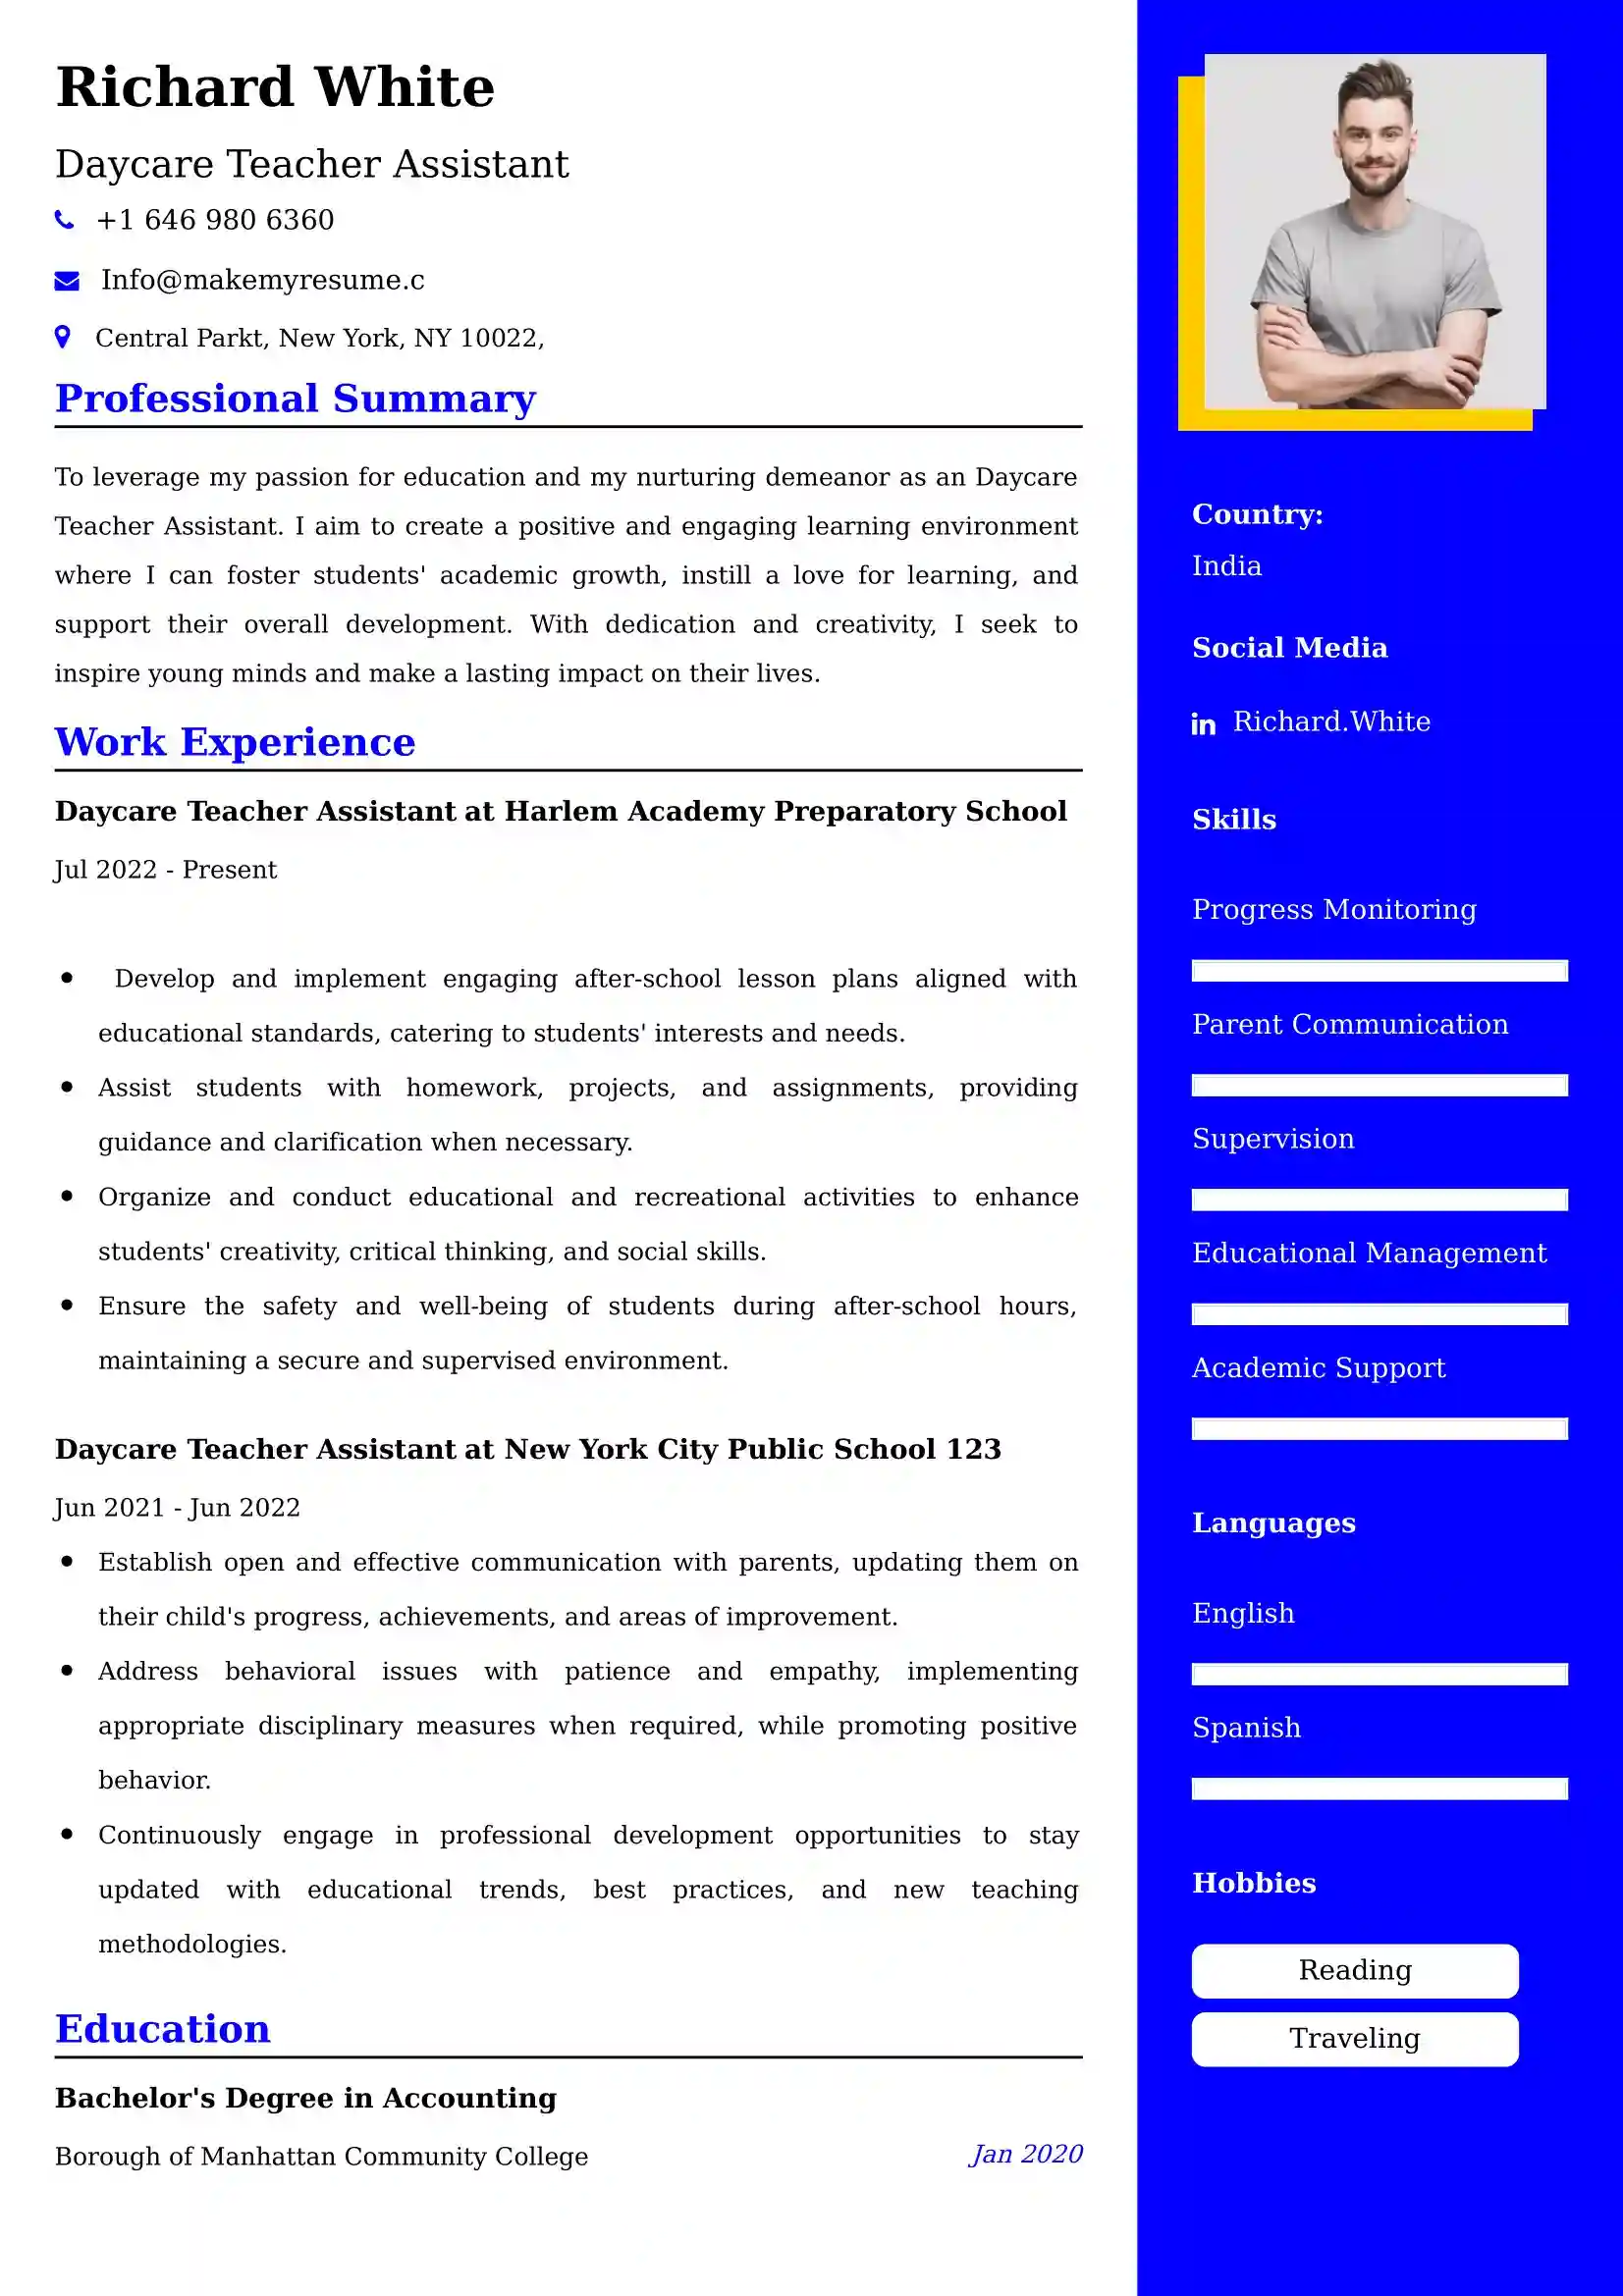 Daycare Teacher Assistant Resume Examples - Brazilian Format, Latest Template